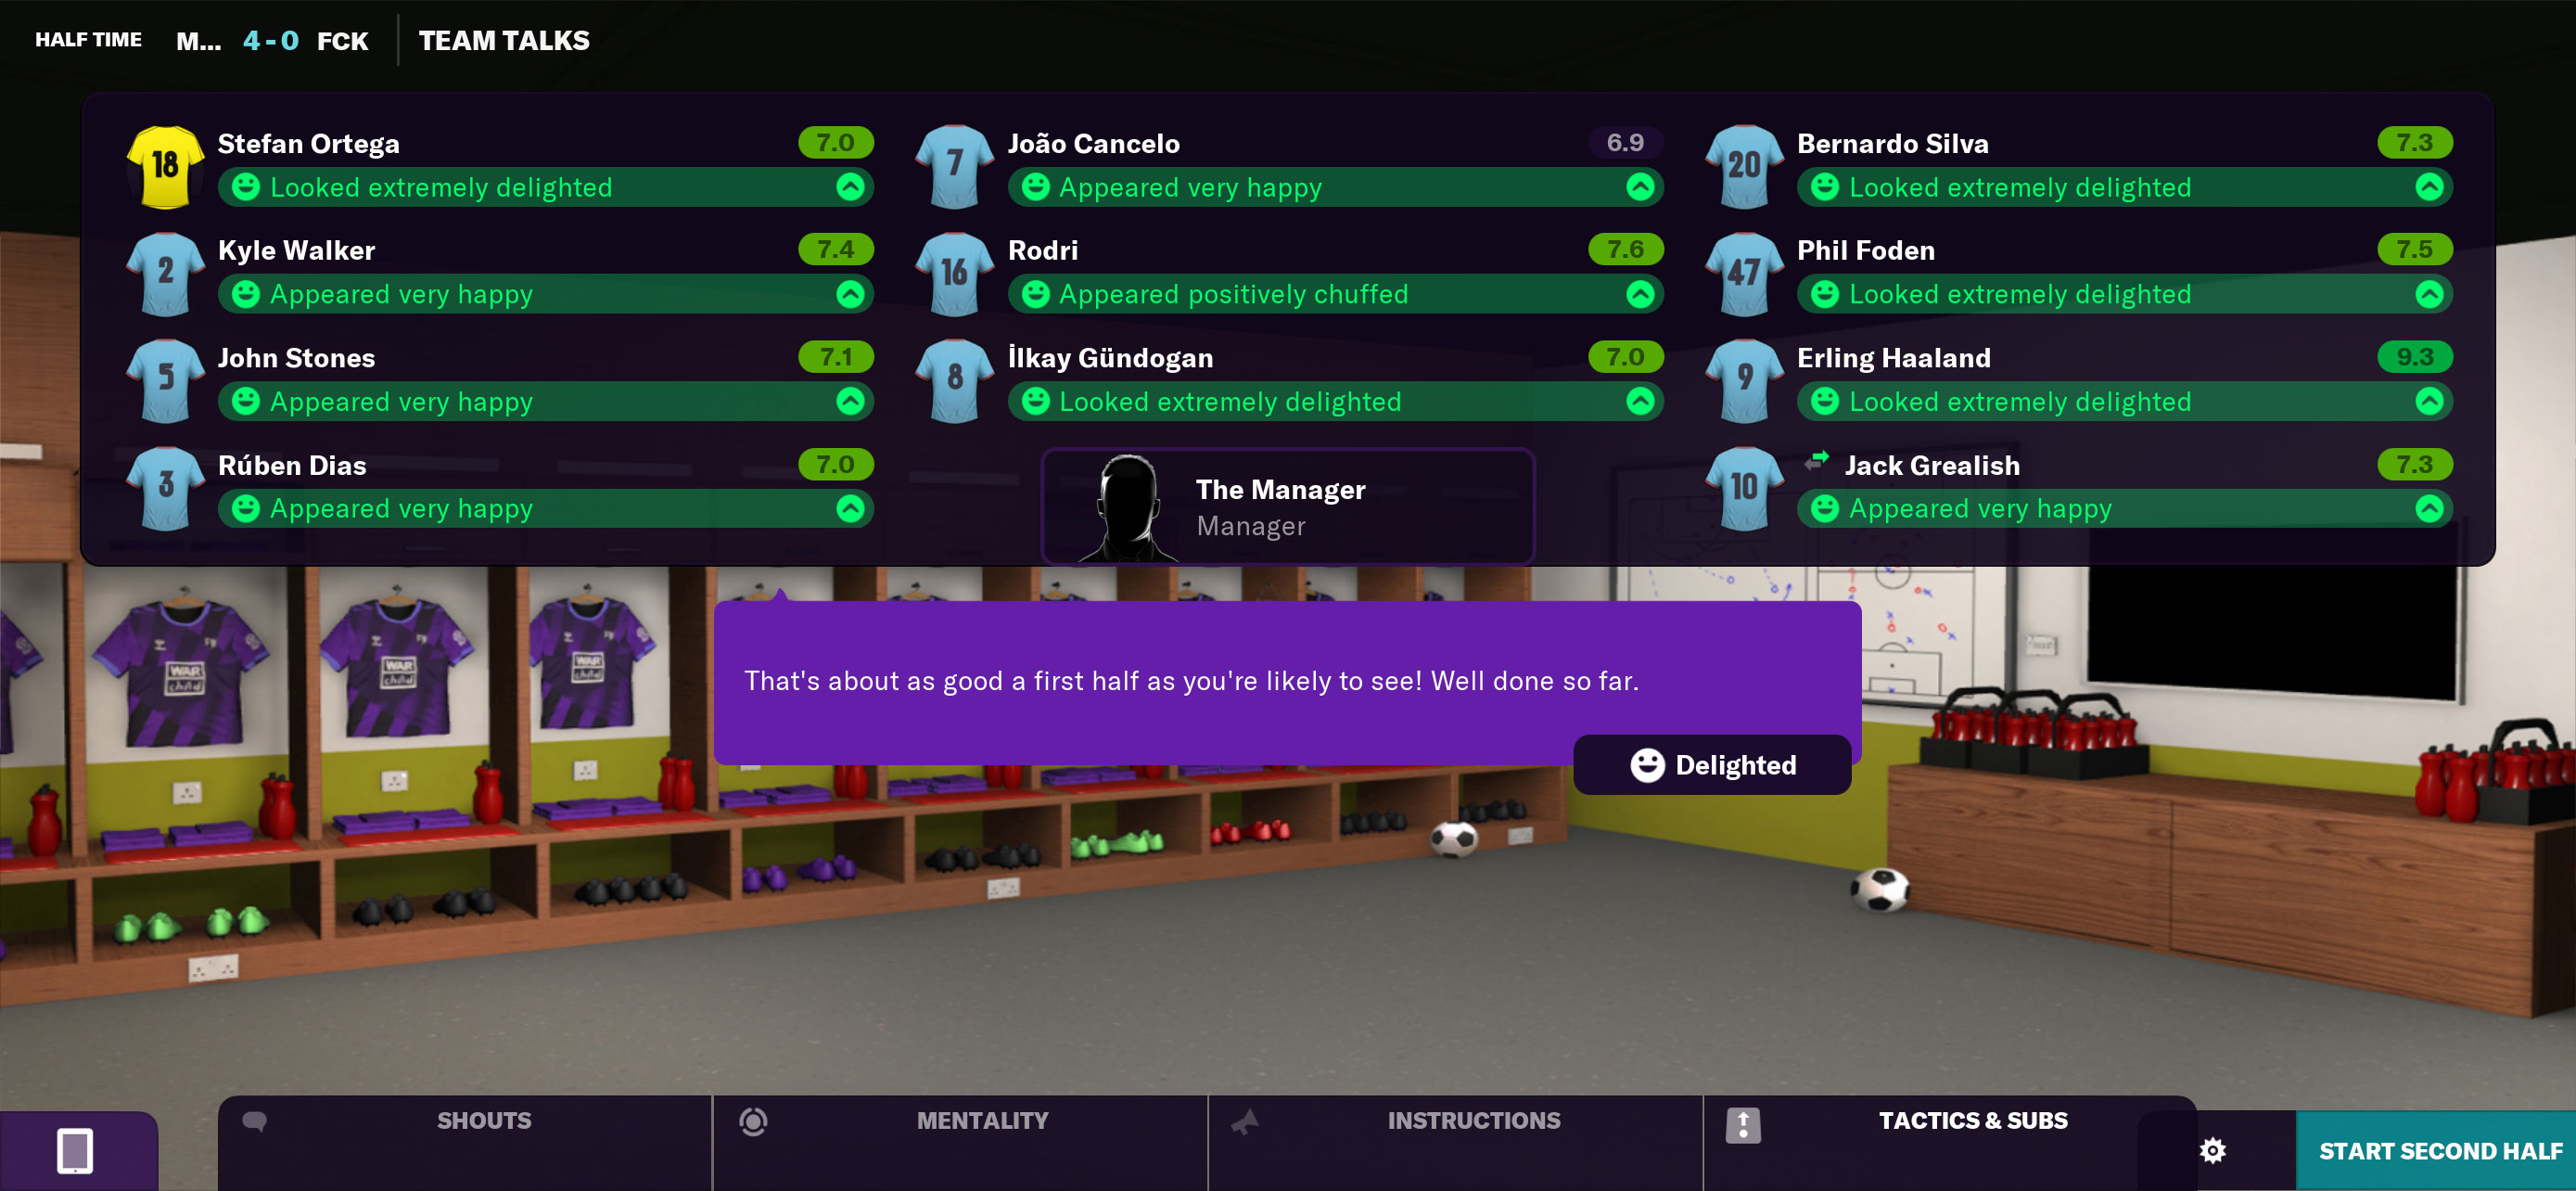 Football Manager 2023 Touch Now Available on Apple Arcade - CNET